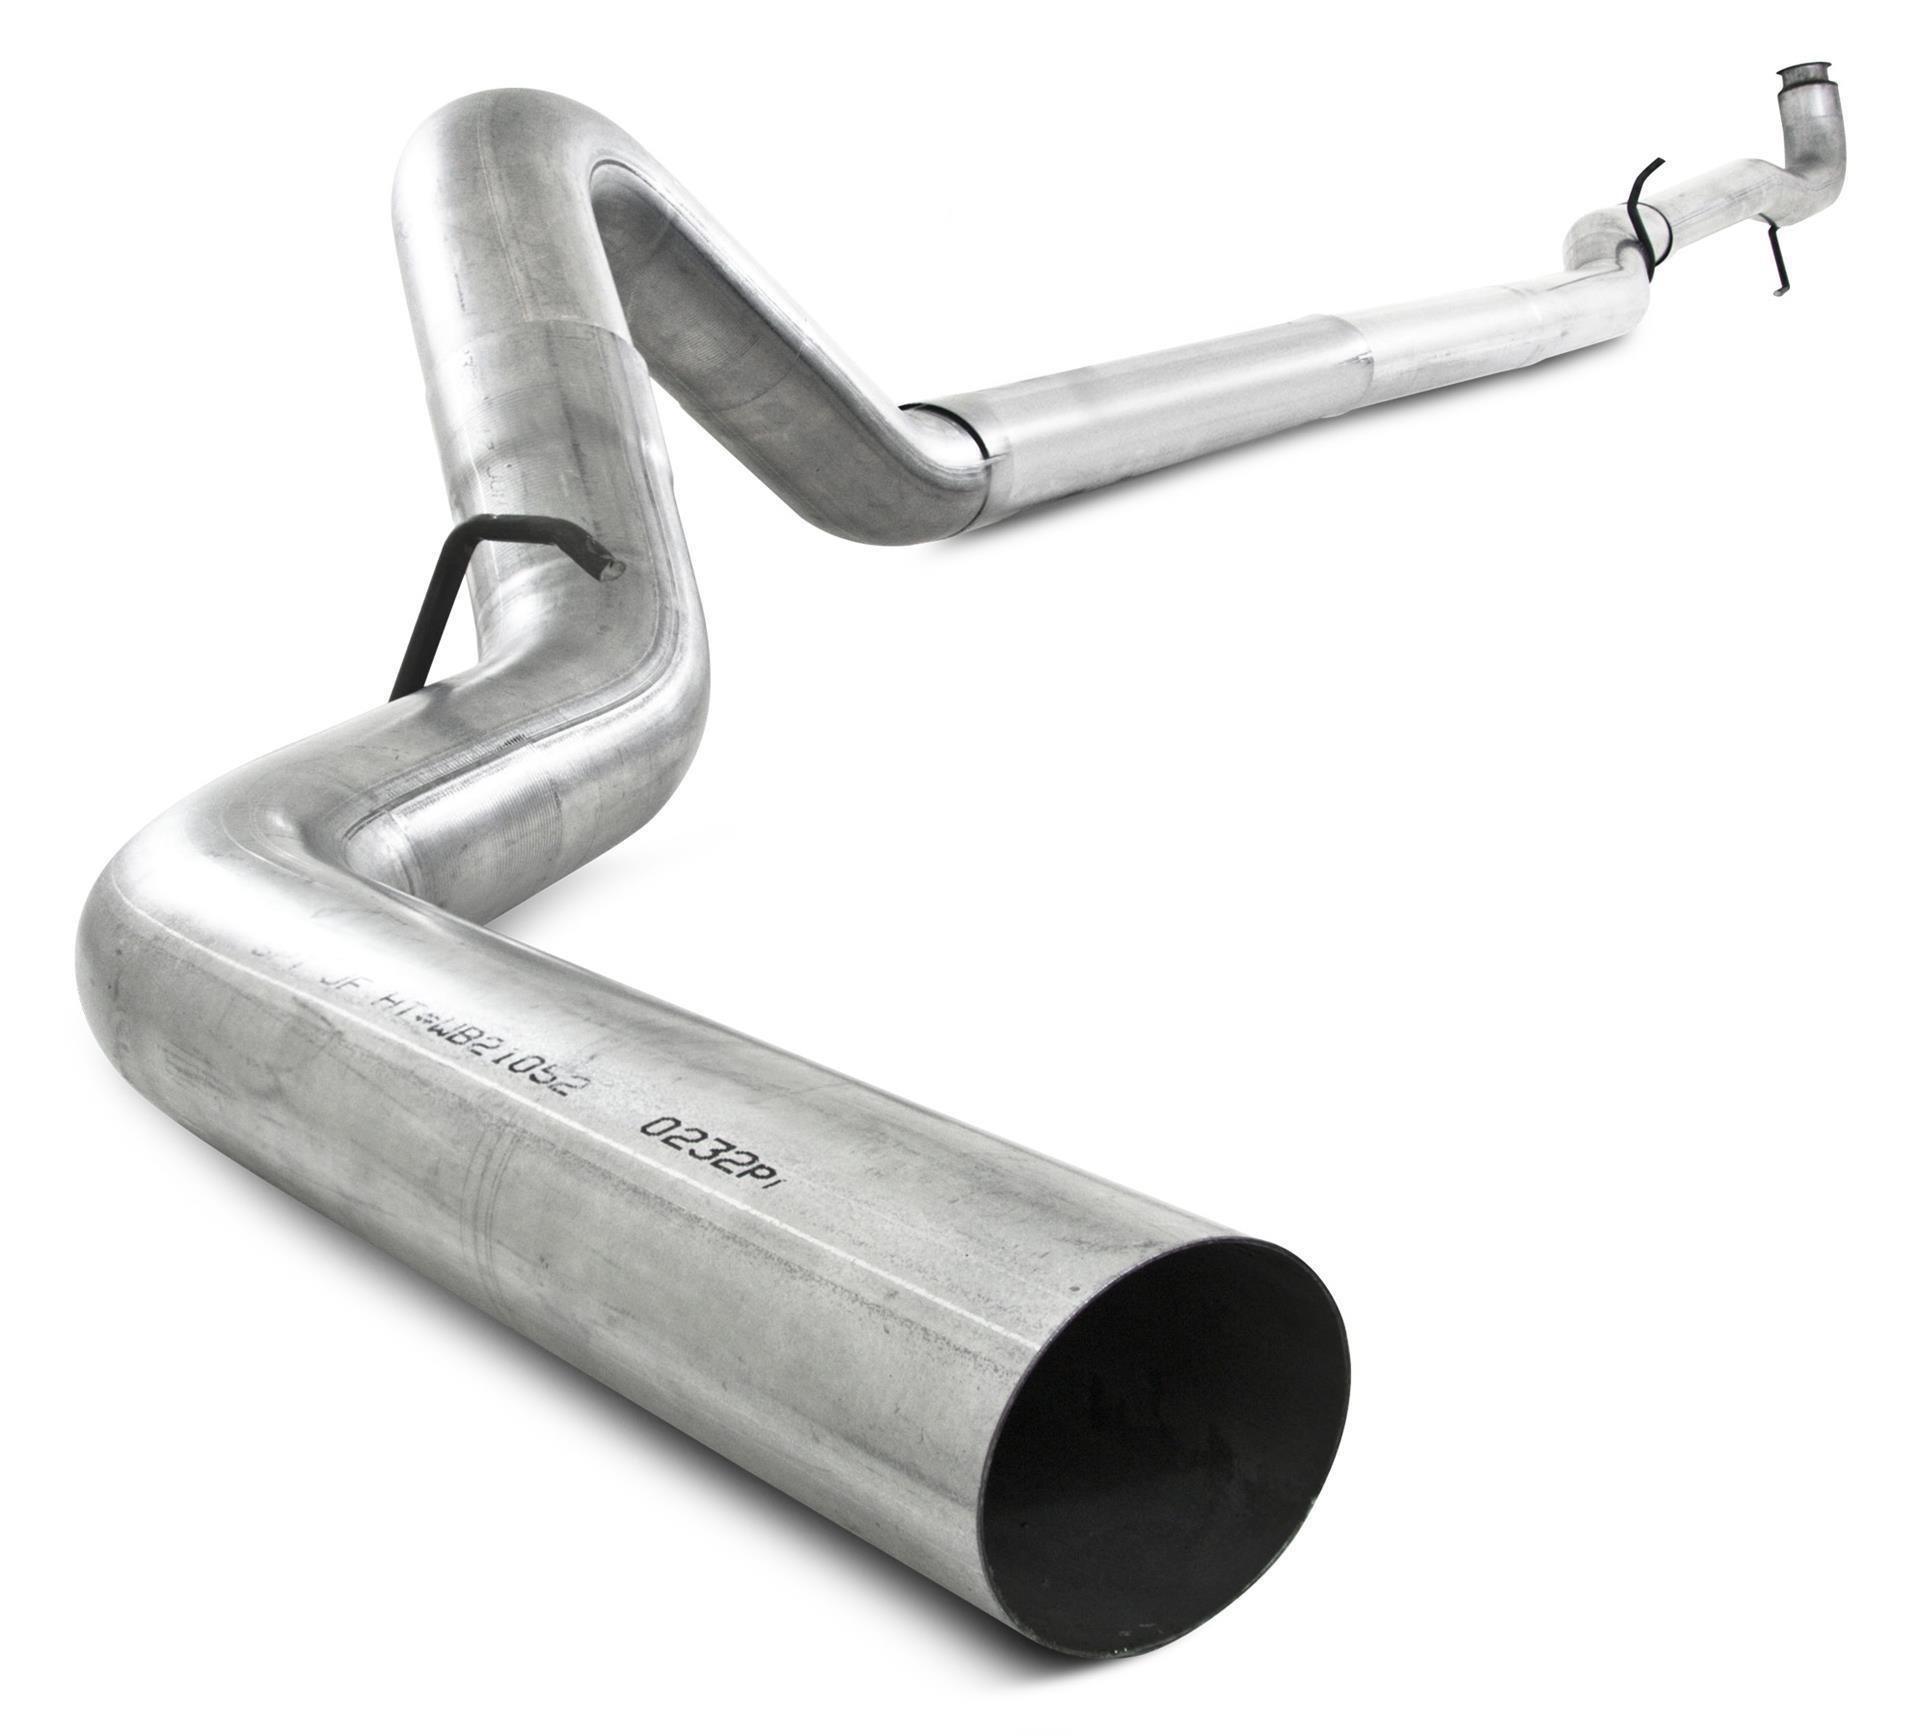 MBRP Stainless Steel Front-Pipe w/Flange for 2001-2005 Chevy GMC 6.6L Duramax GM